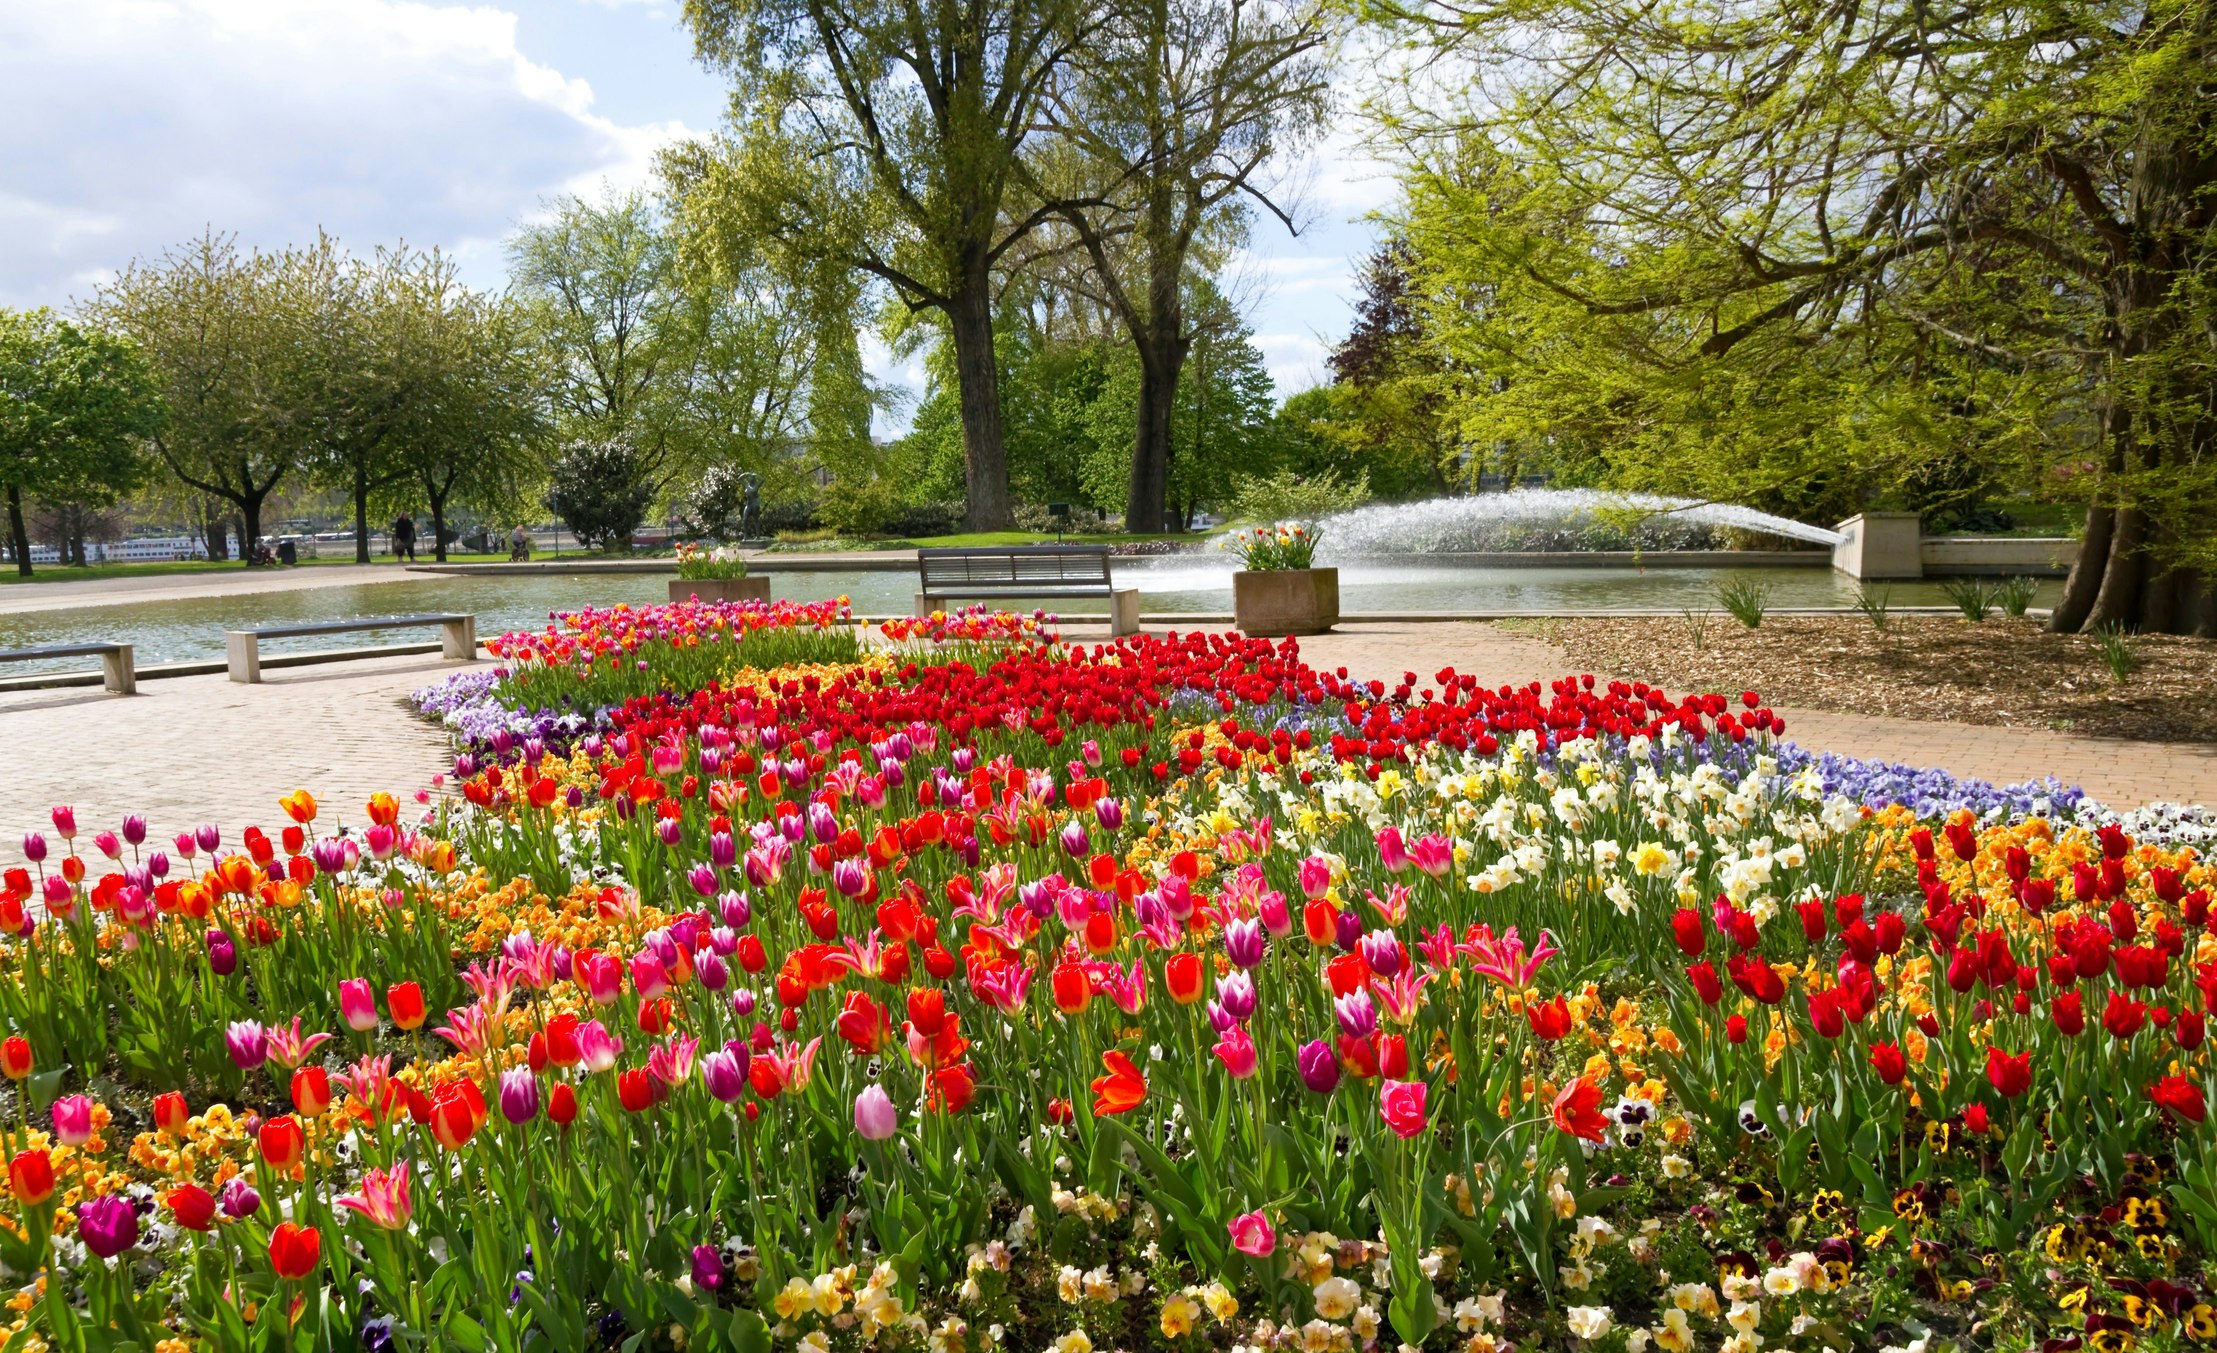 Cologne: Wonderful flower beds with tulips and other spring flowers in the Rhine Park Cologne